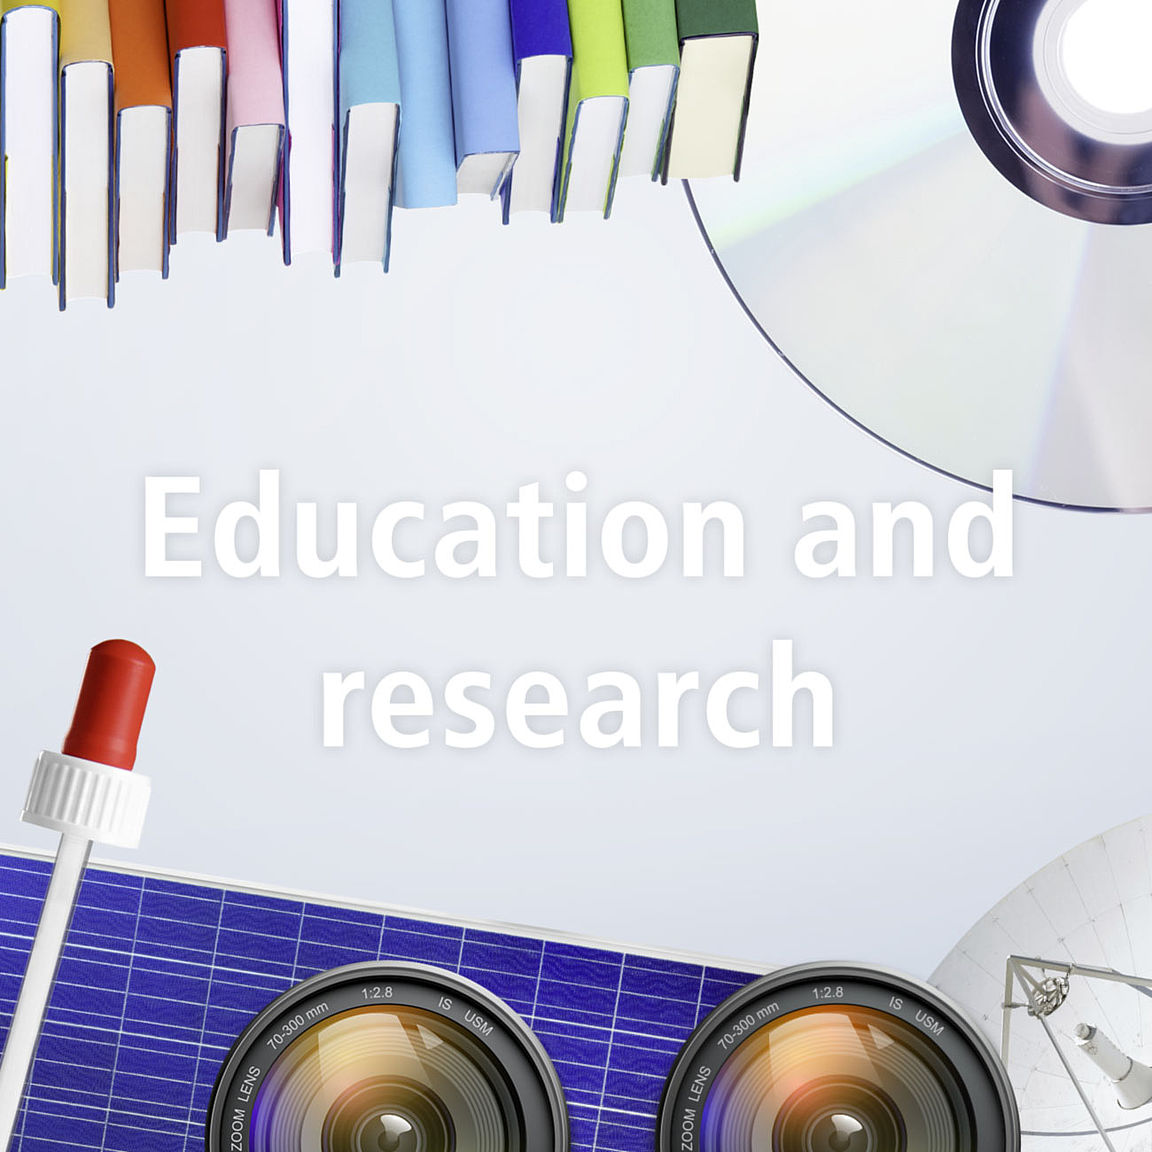 Education and research